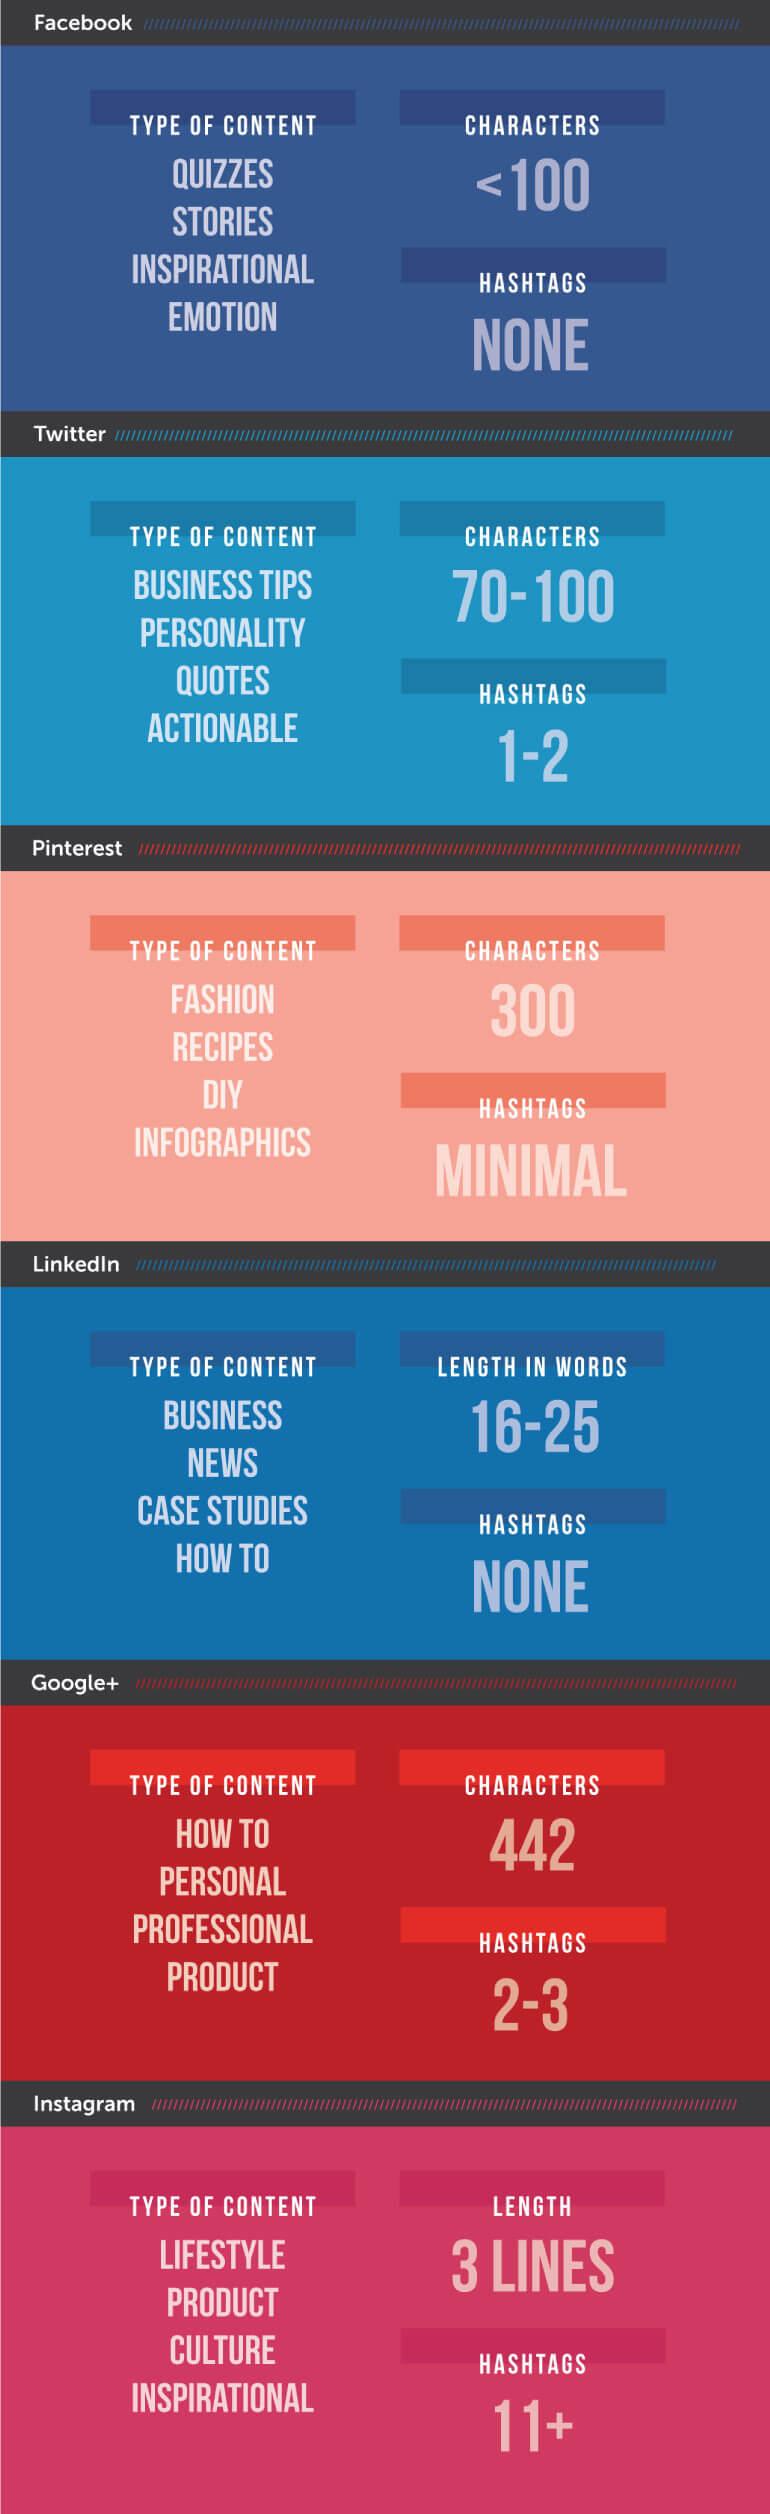 Which types of content should you share on each network?